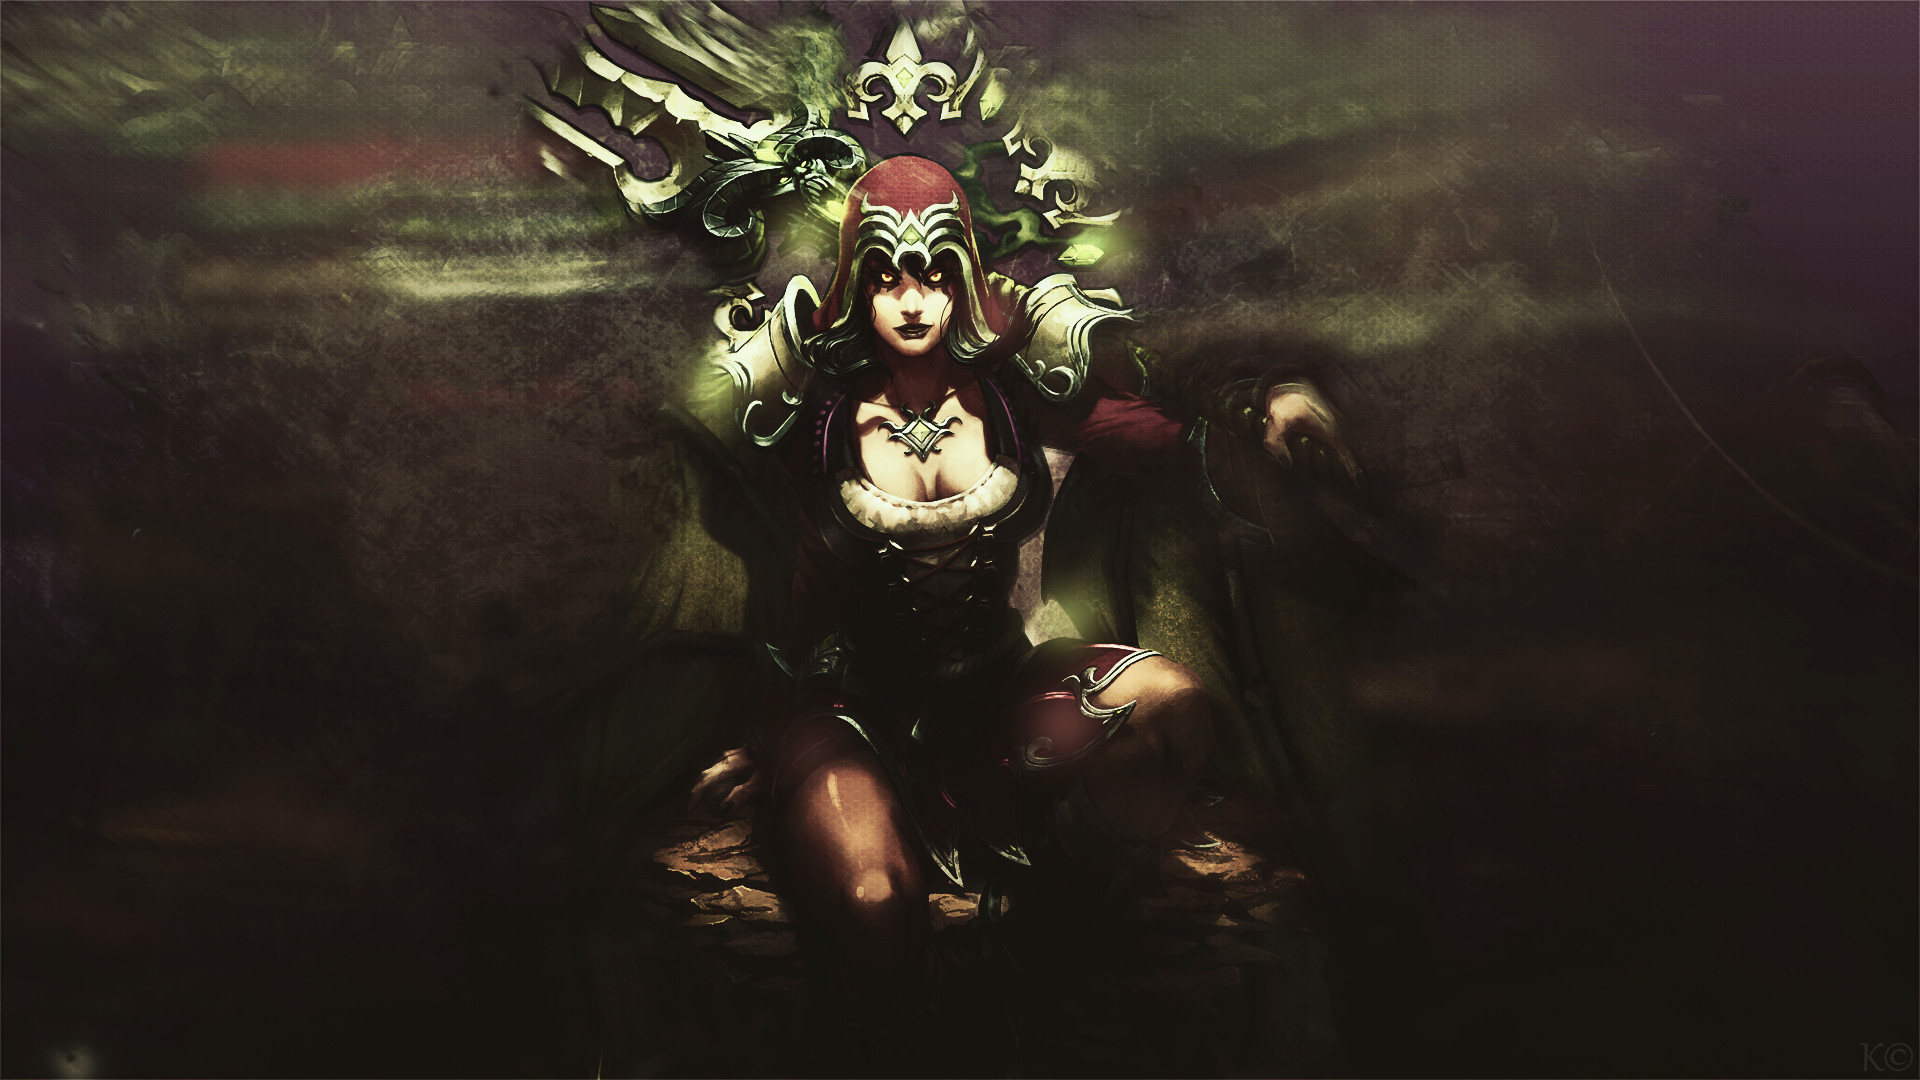 1920x1080 Scarlet Coven Isis - SMITE Wallpaper by DustyMcBacon